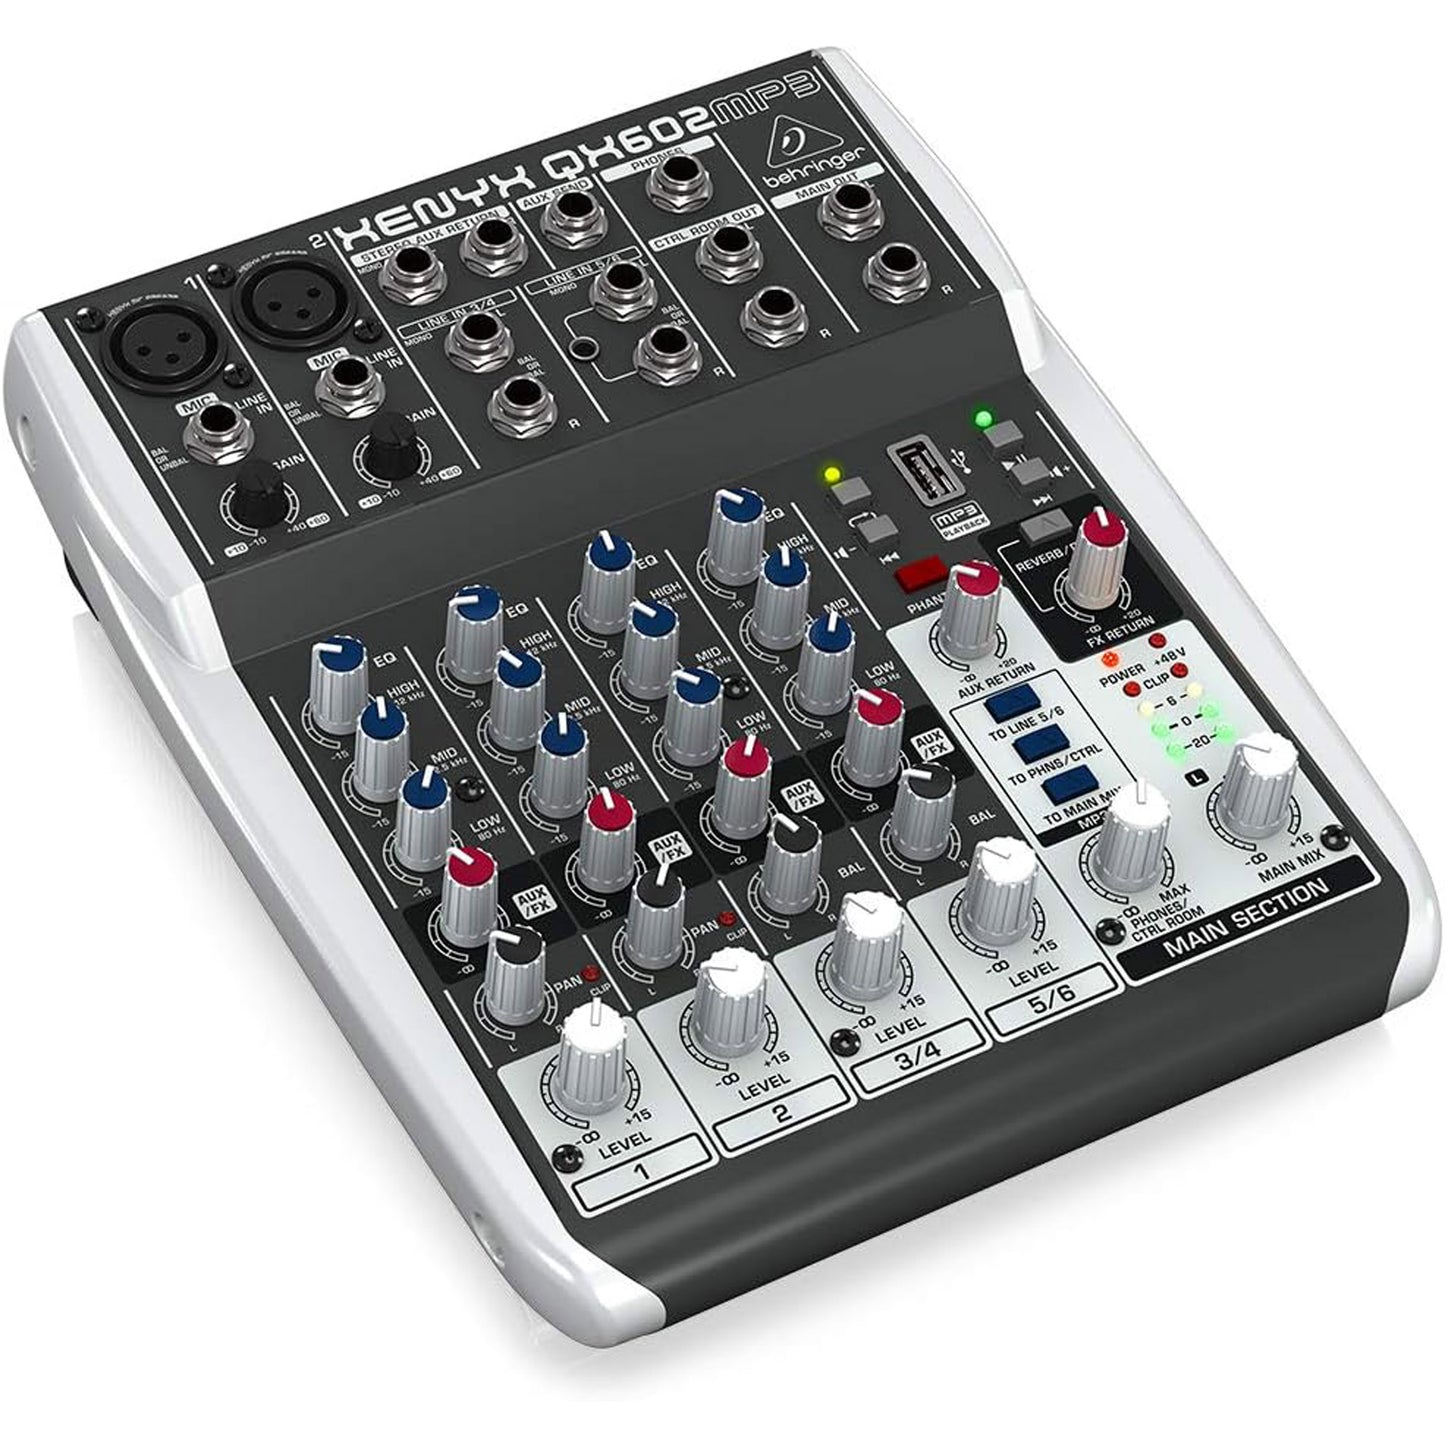 Behringer Xenyx QX602MP3 Mixer with USB MP3 Playback